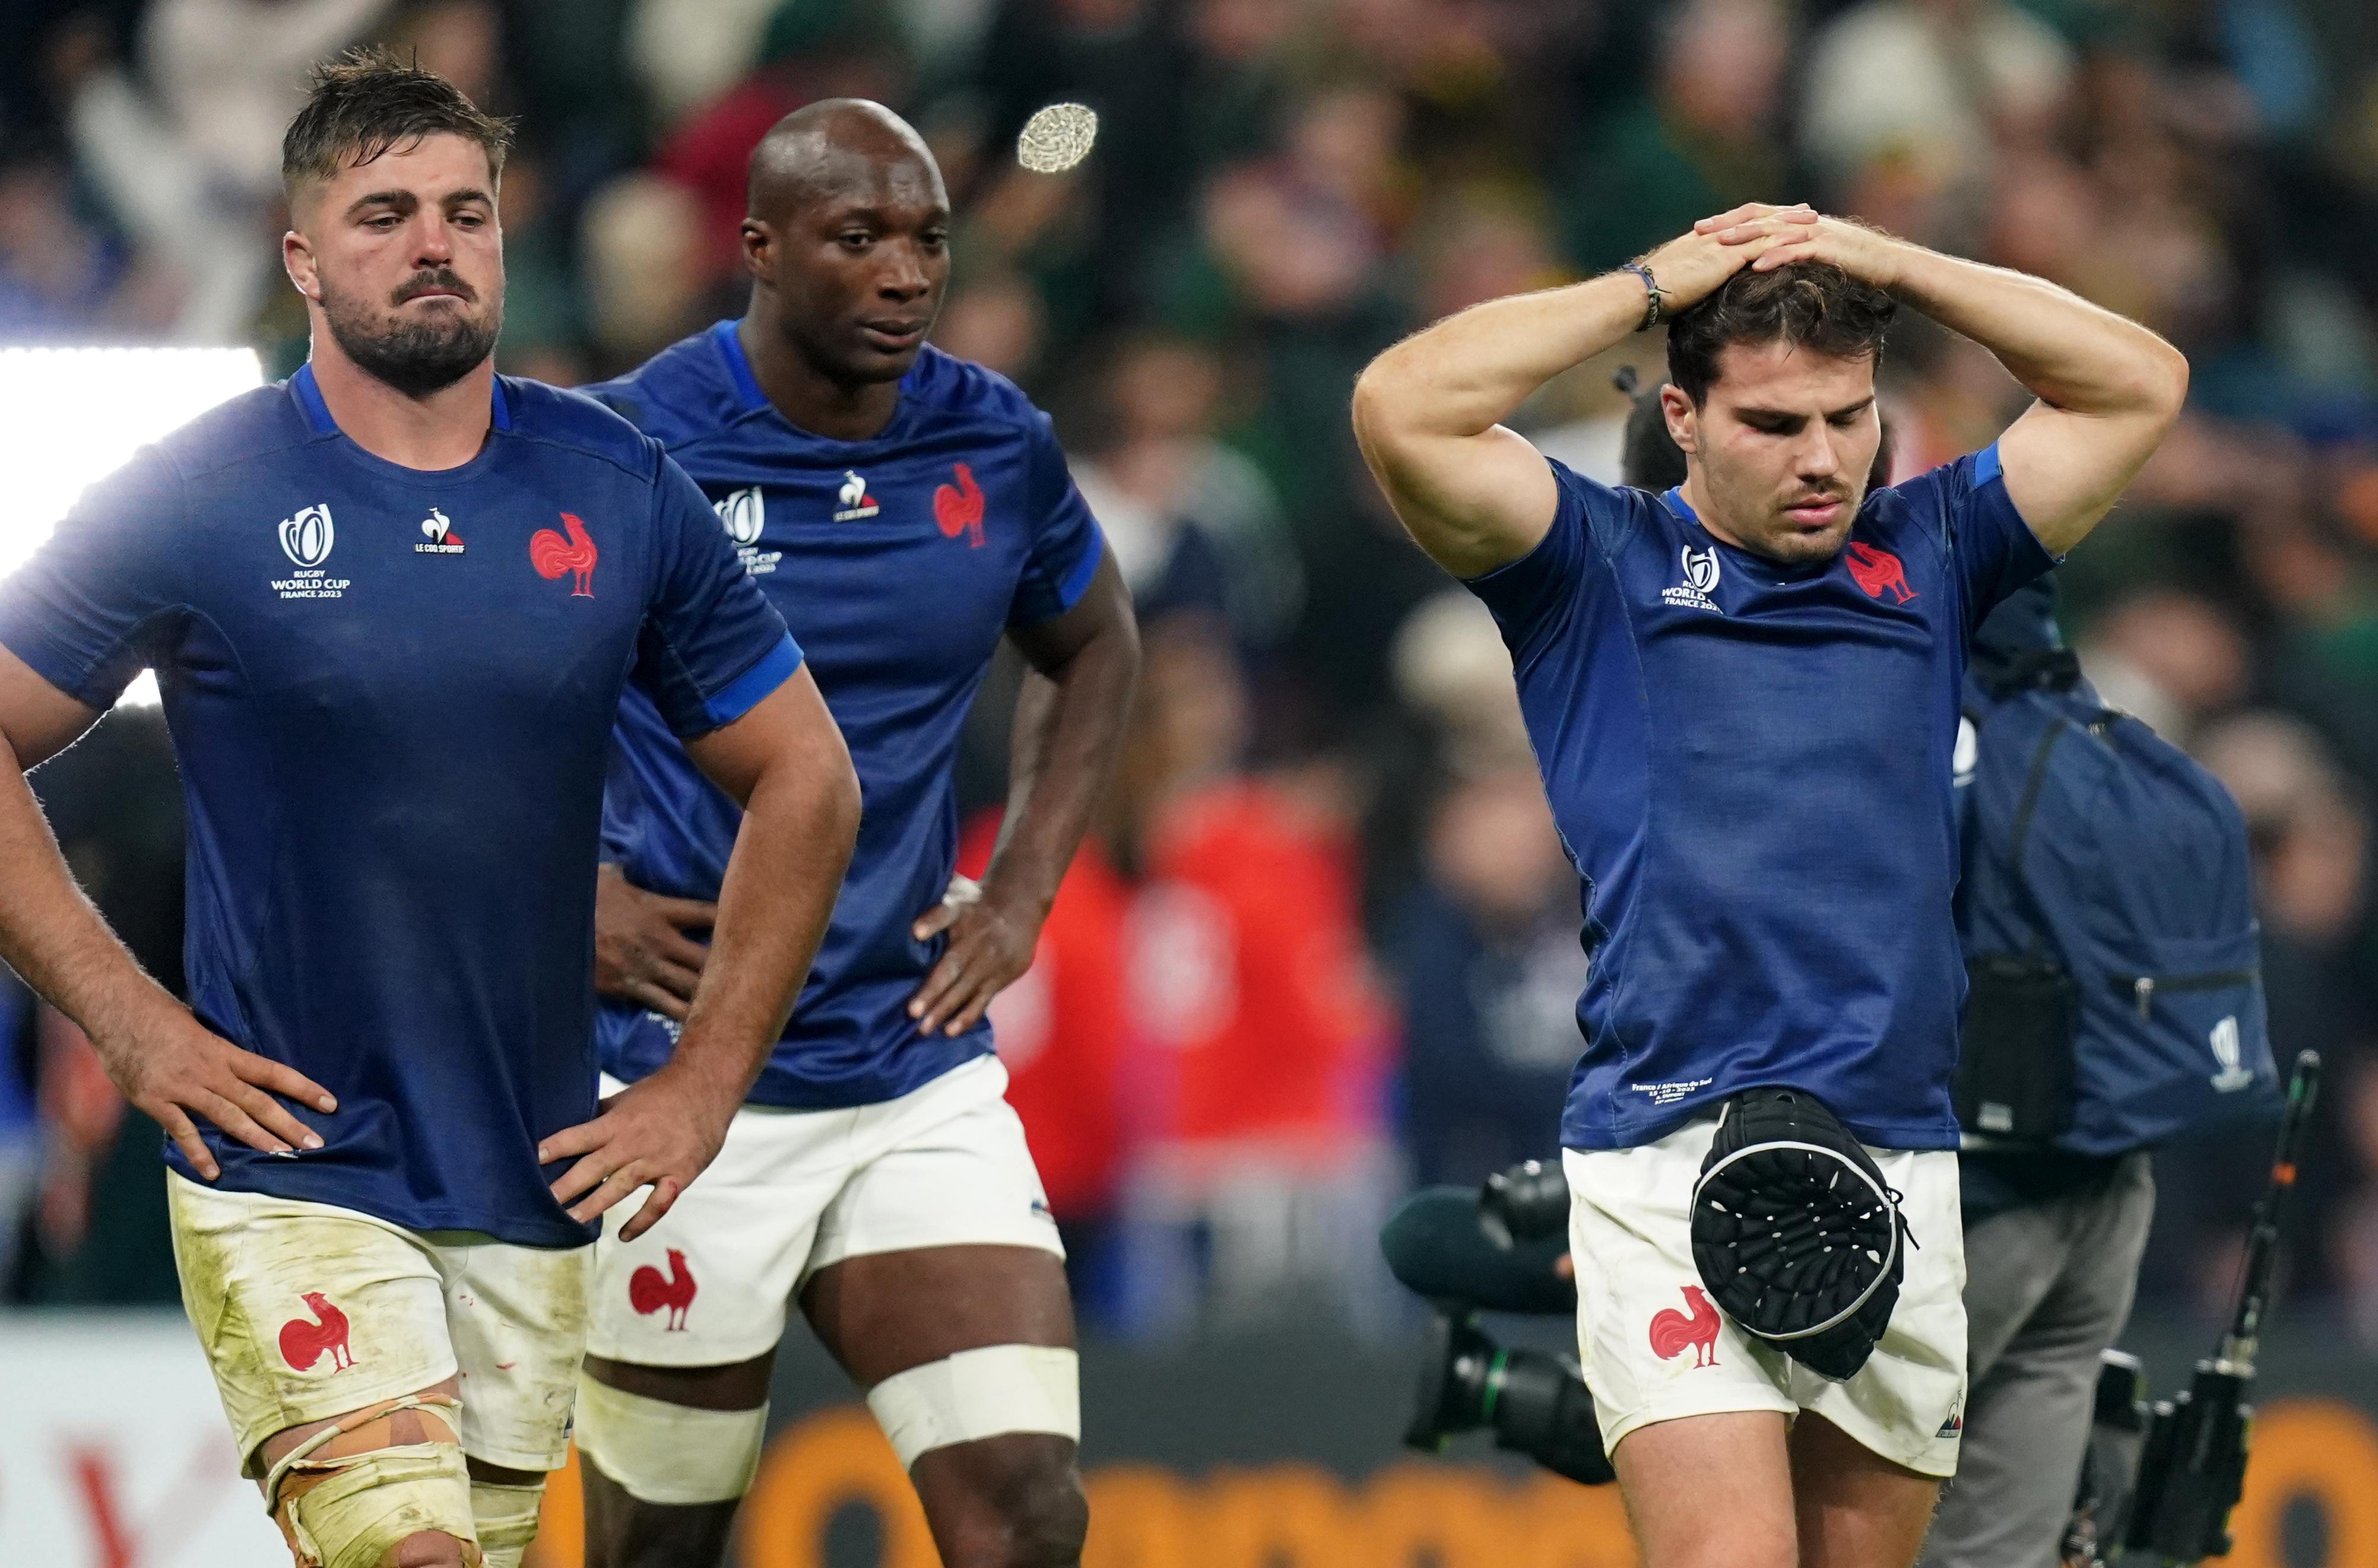 France's World Cup dream was ended by eventual champions South Africa